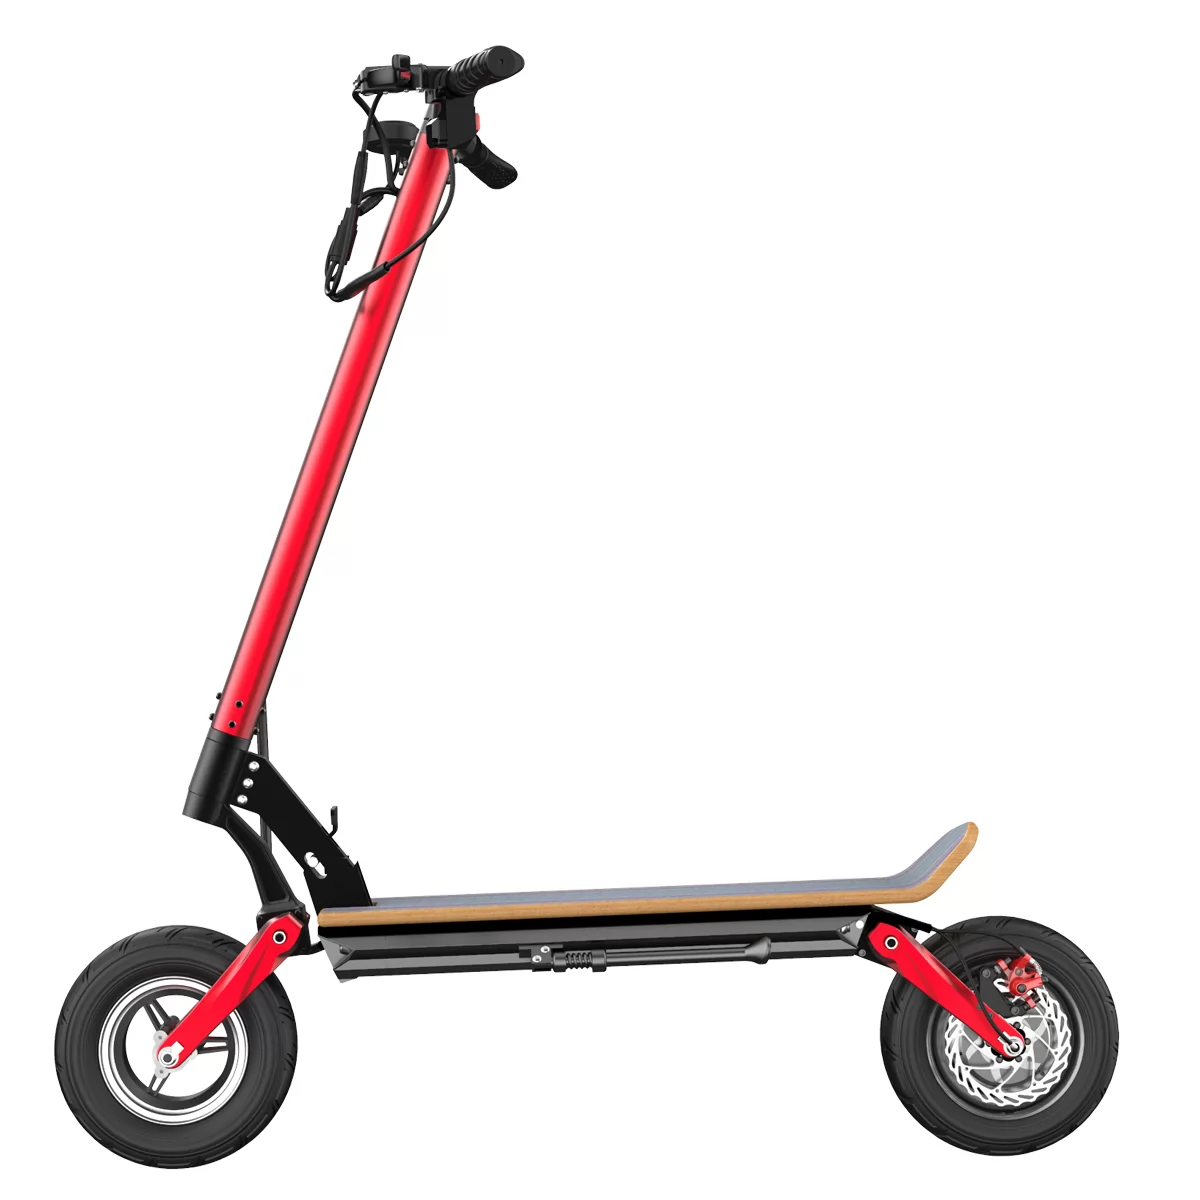 2021 Foldable electric scooter high quality Portable scooter KB5